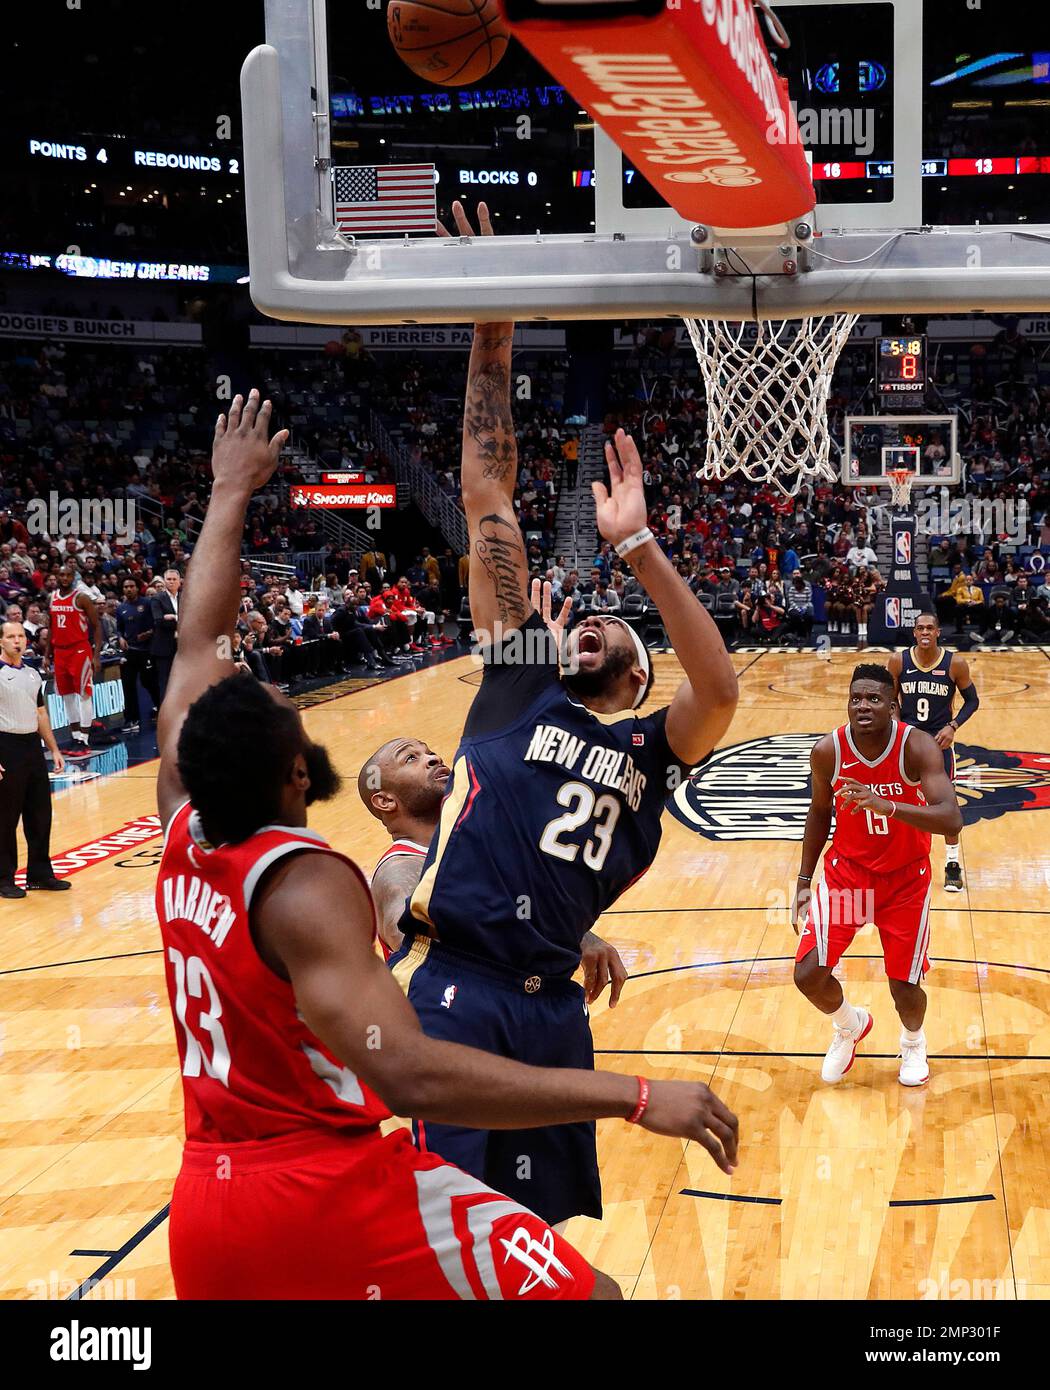 New Orleans Pelicans guard Ian Clark (23) goes to the basket against Houston Rockets guard James Harden (13) during the first half of an NBA basketball game in New Orleans, Friday, Jan. 26, 2018. (AP Photo/Gerald Herbert) Stock Photo